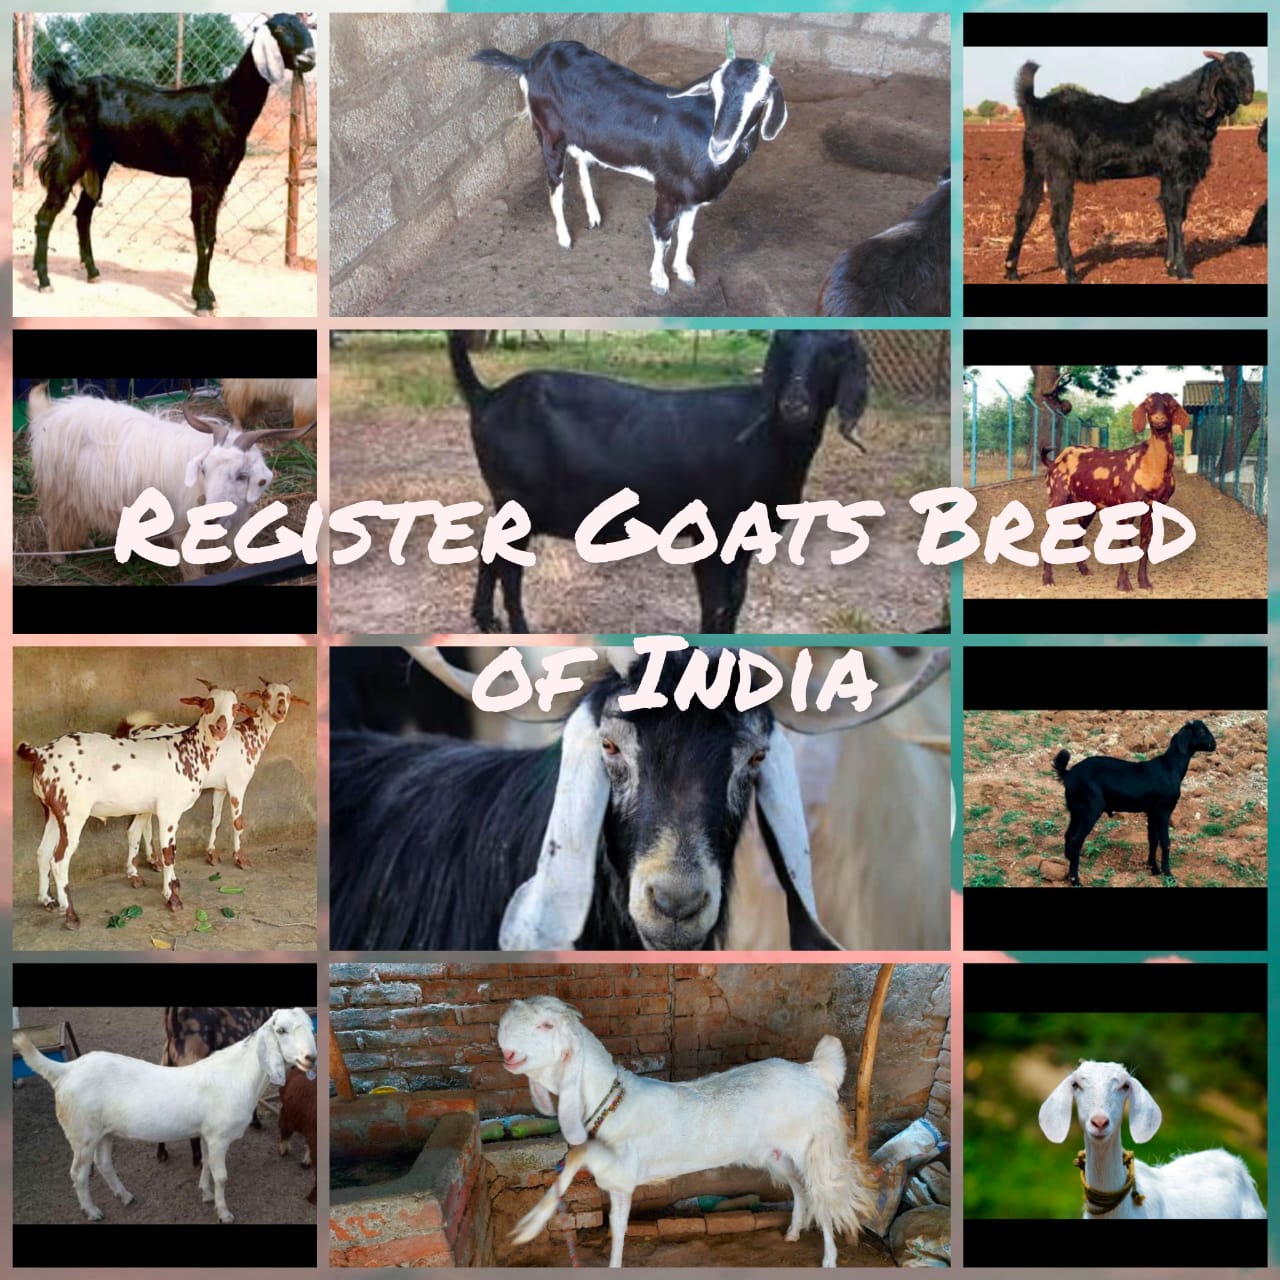 Registered Goats Breed Of India | Animals Super Store